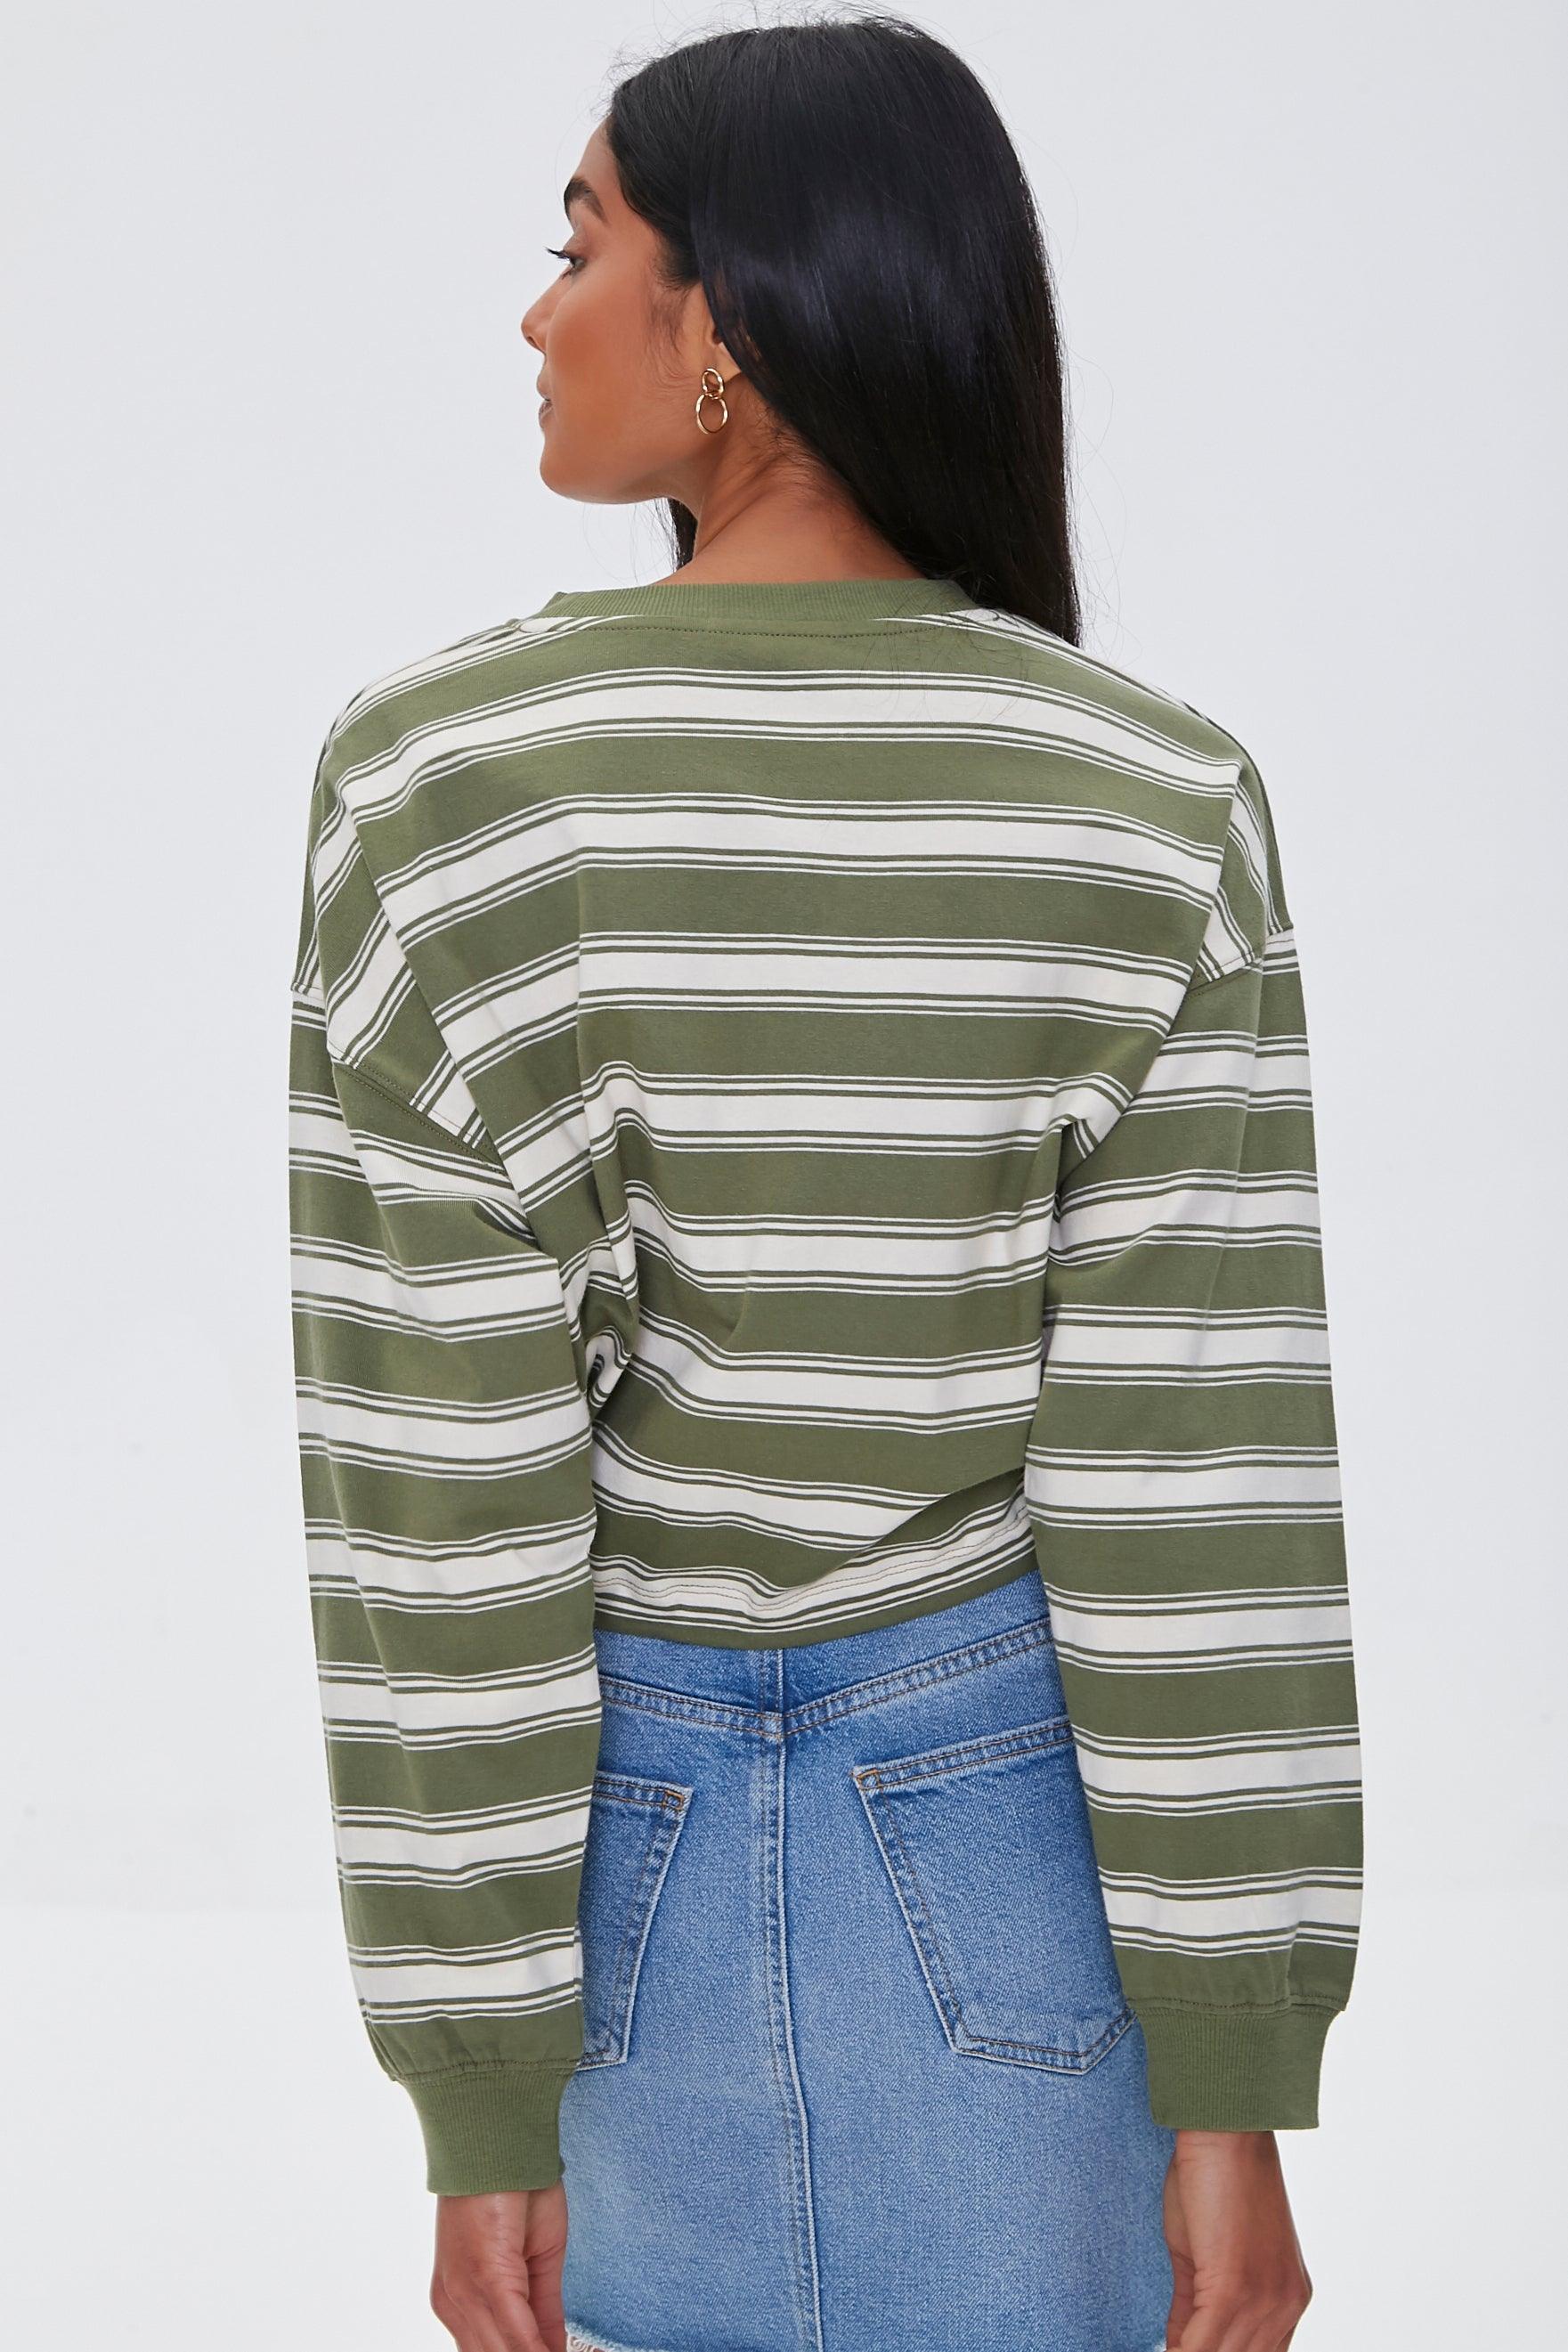 Olivemulti NYC Graphic Striped Pullover 2